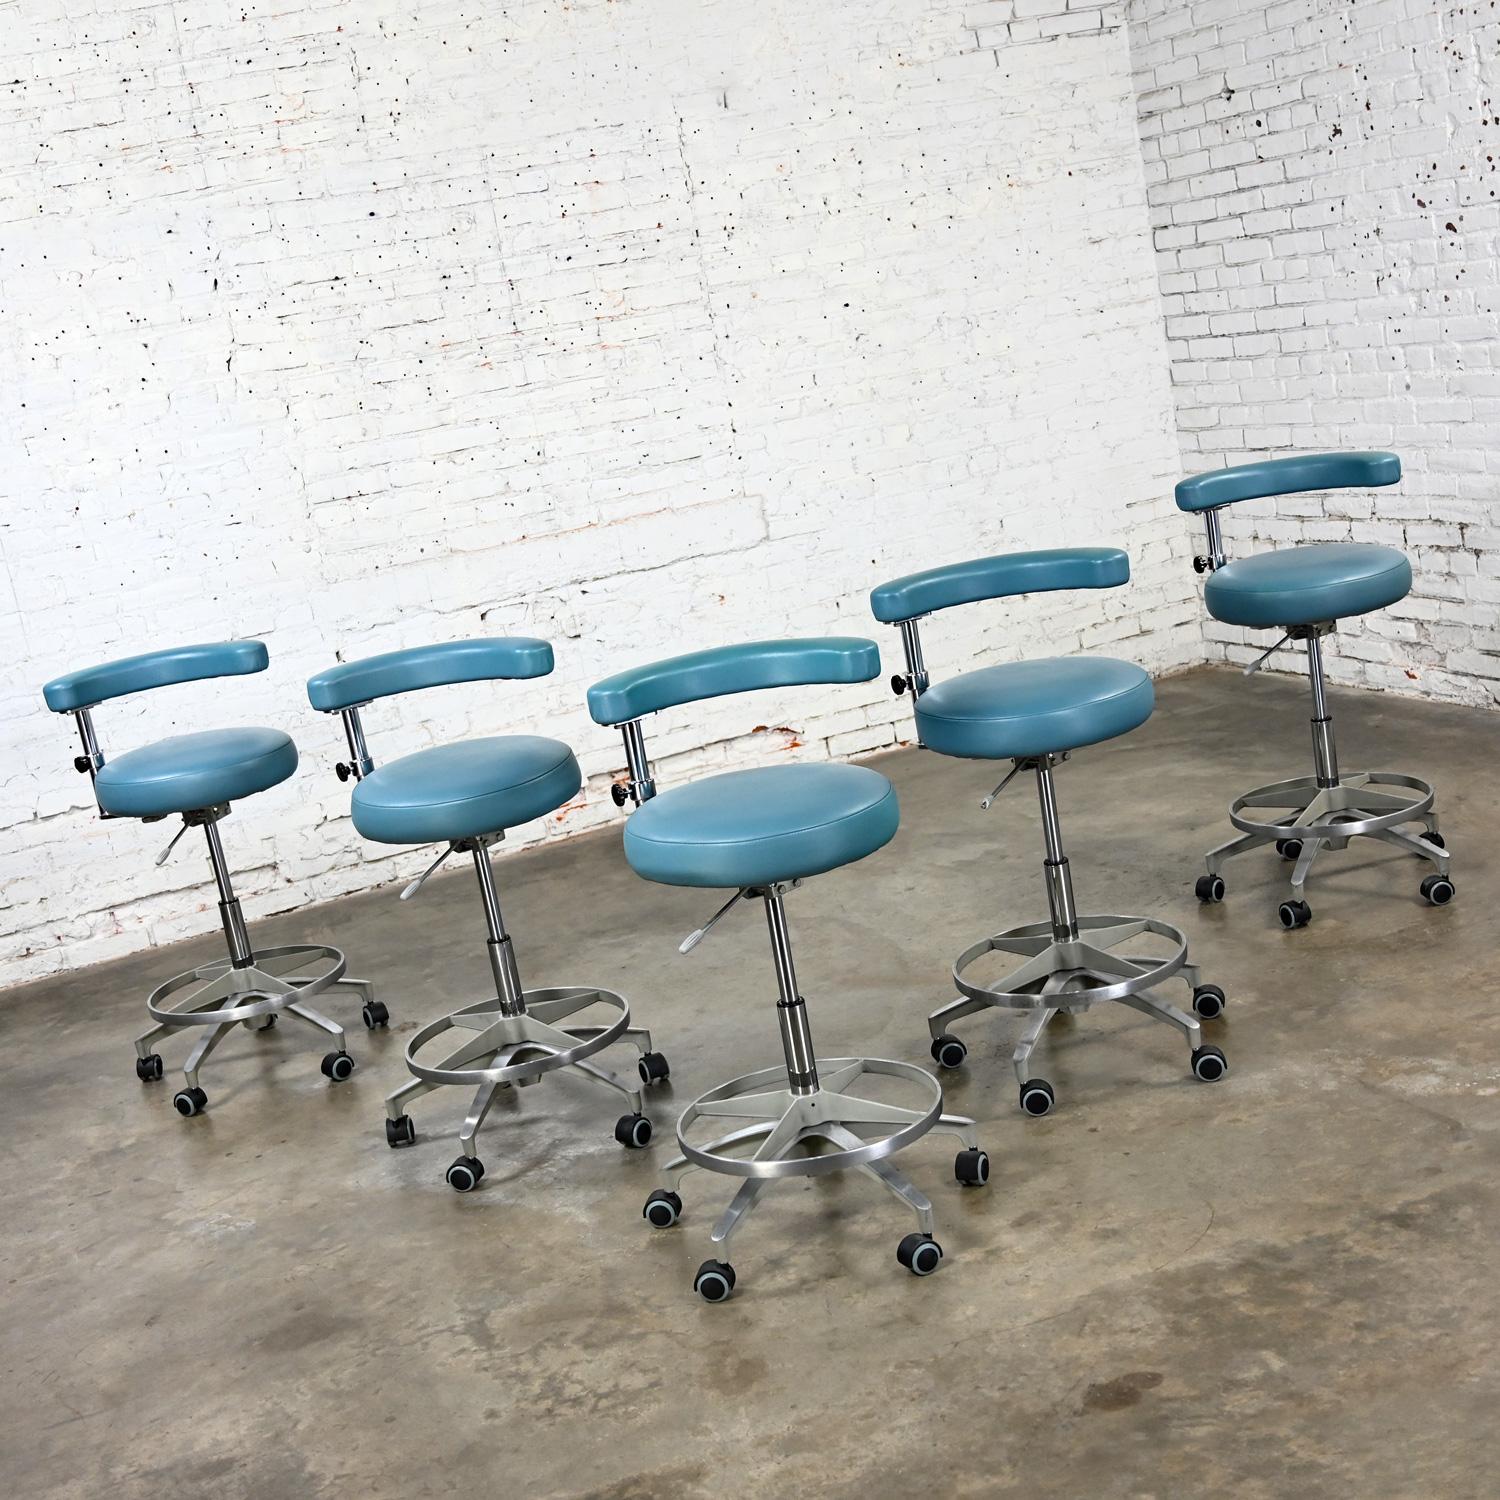 Awesome vintage Industrial medical or dental barstools by A-Dec with steel blue faux leather and adjustable height & swivel, set of 5. Comprised of chrome arm/seat & lower base shaft, cast aluminum ring footrest & 5 prong base on black & gray